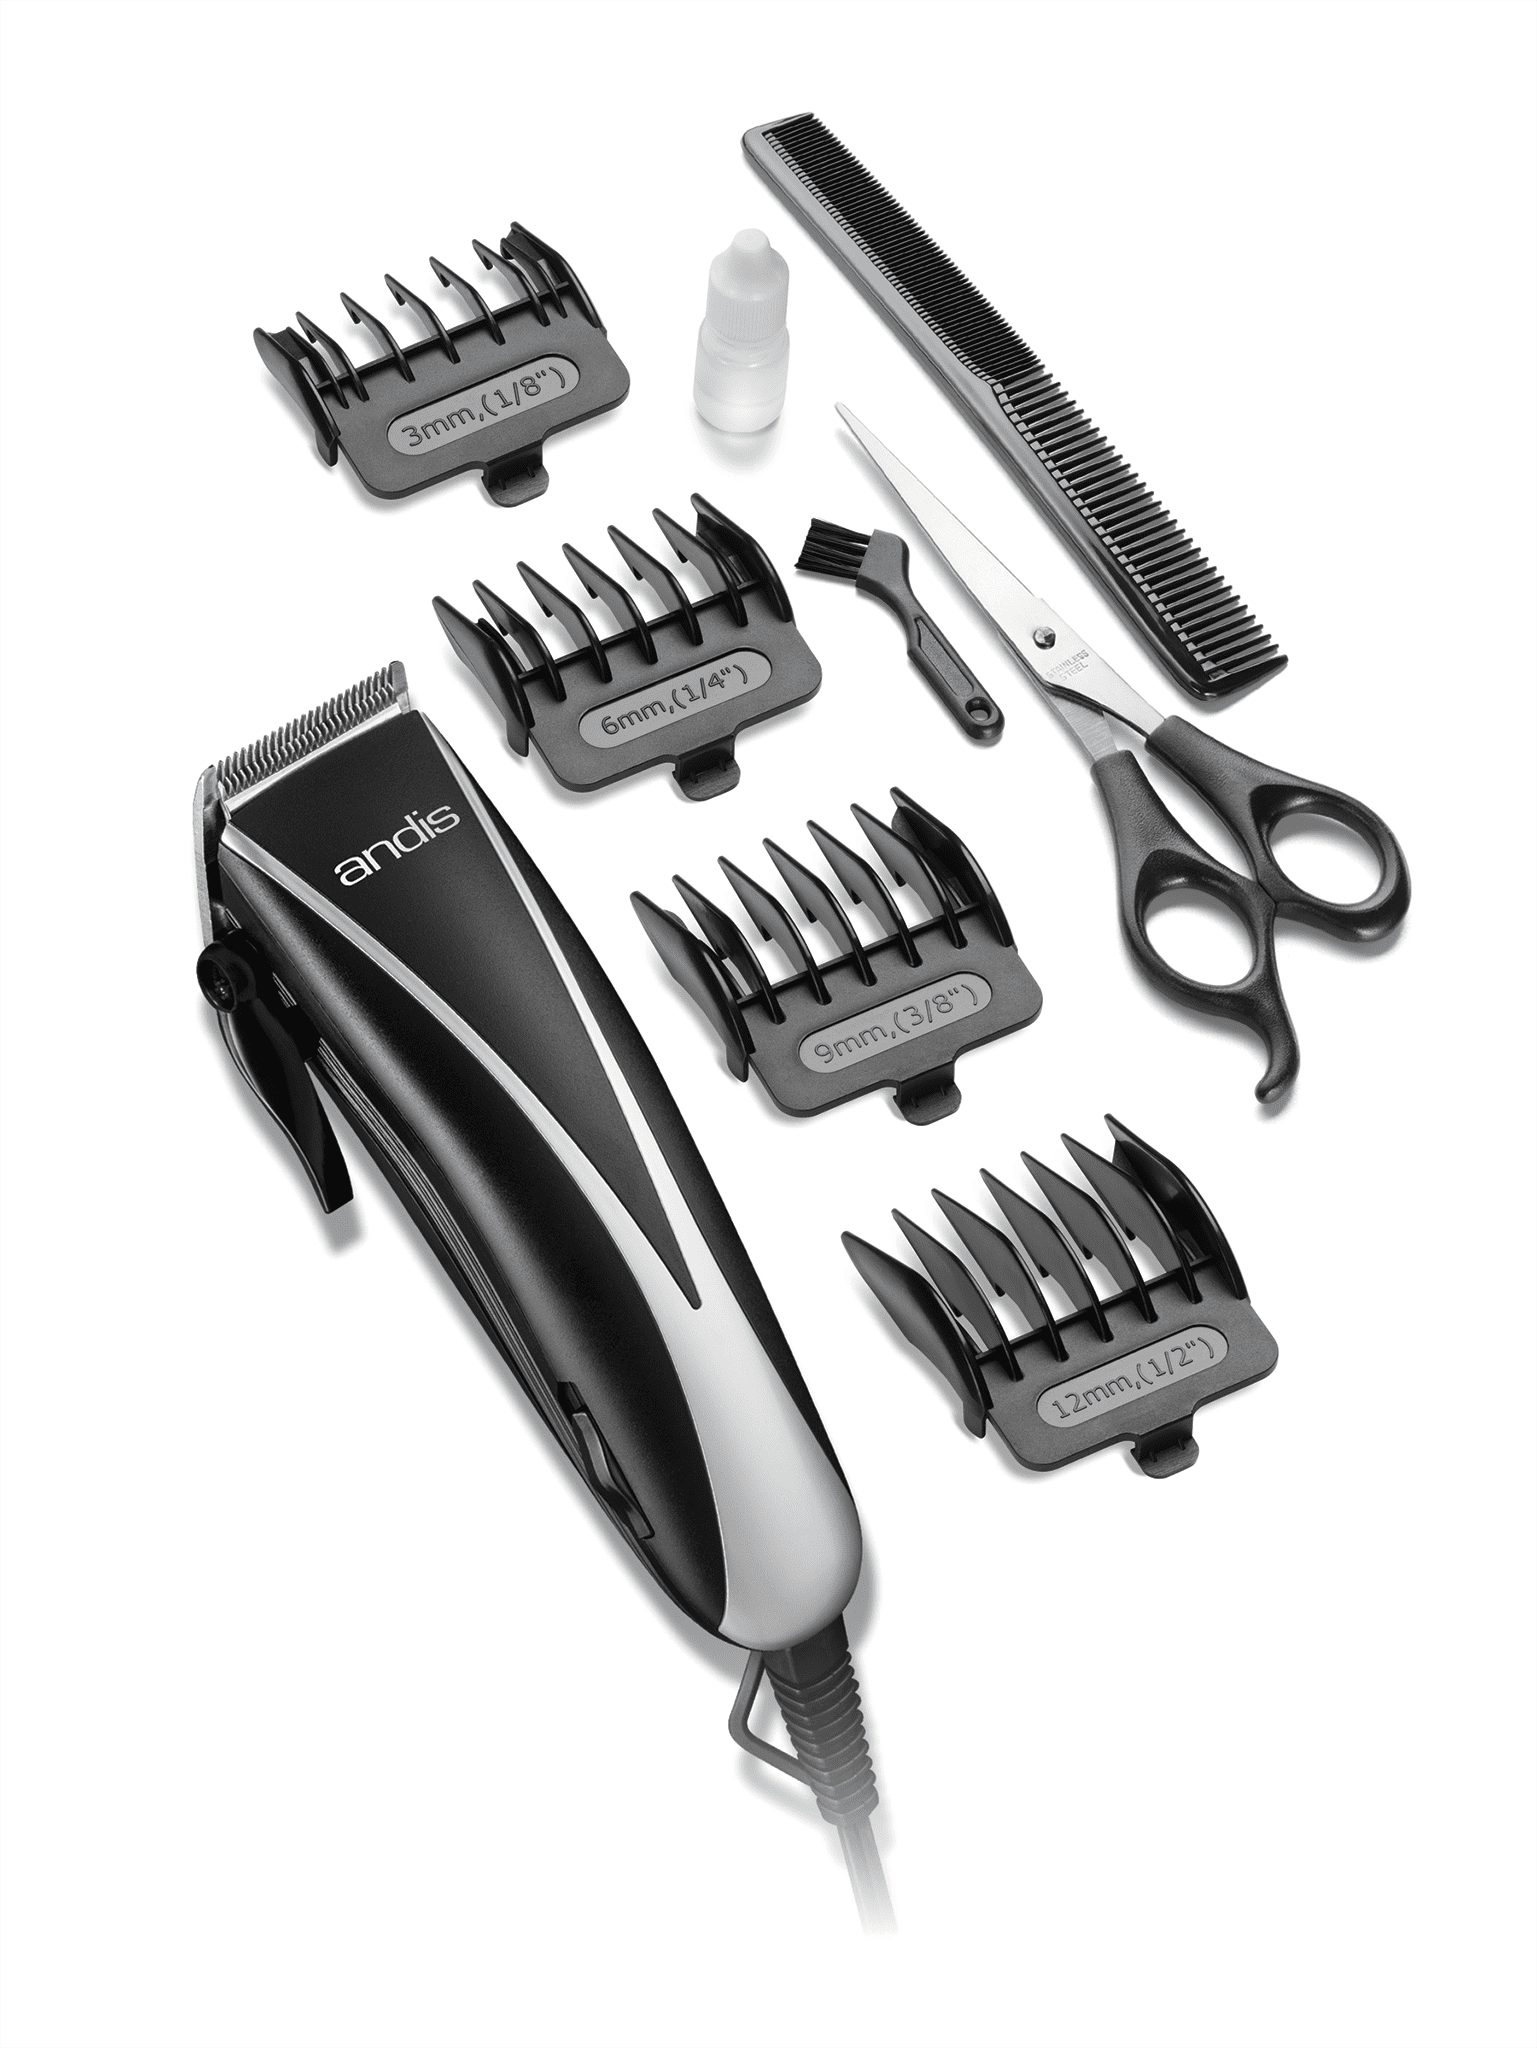 andis clippers set